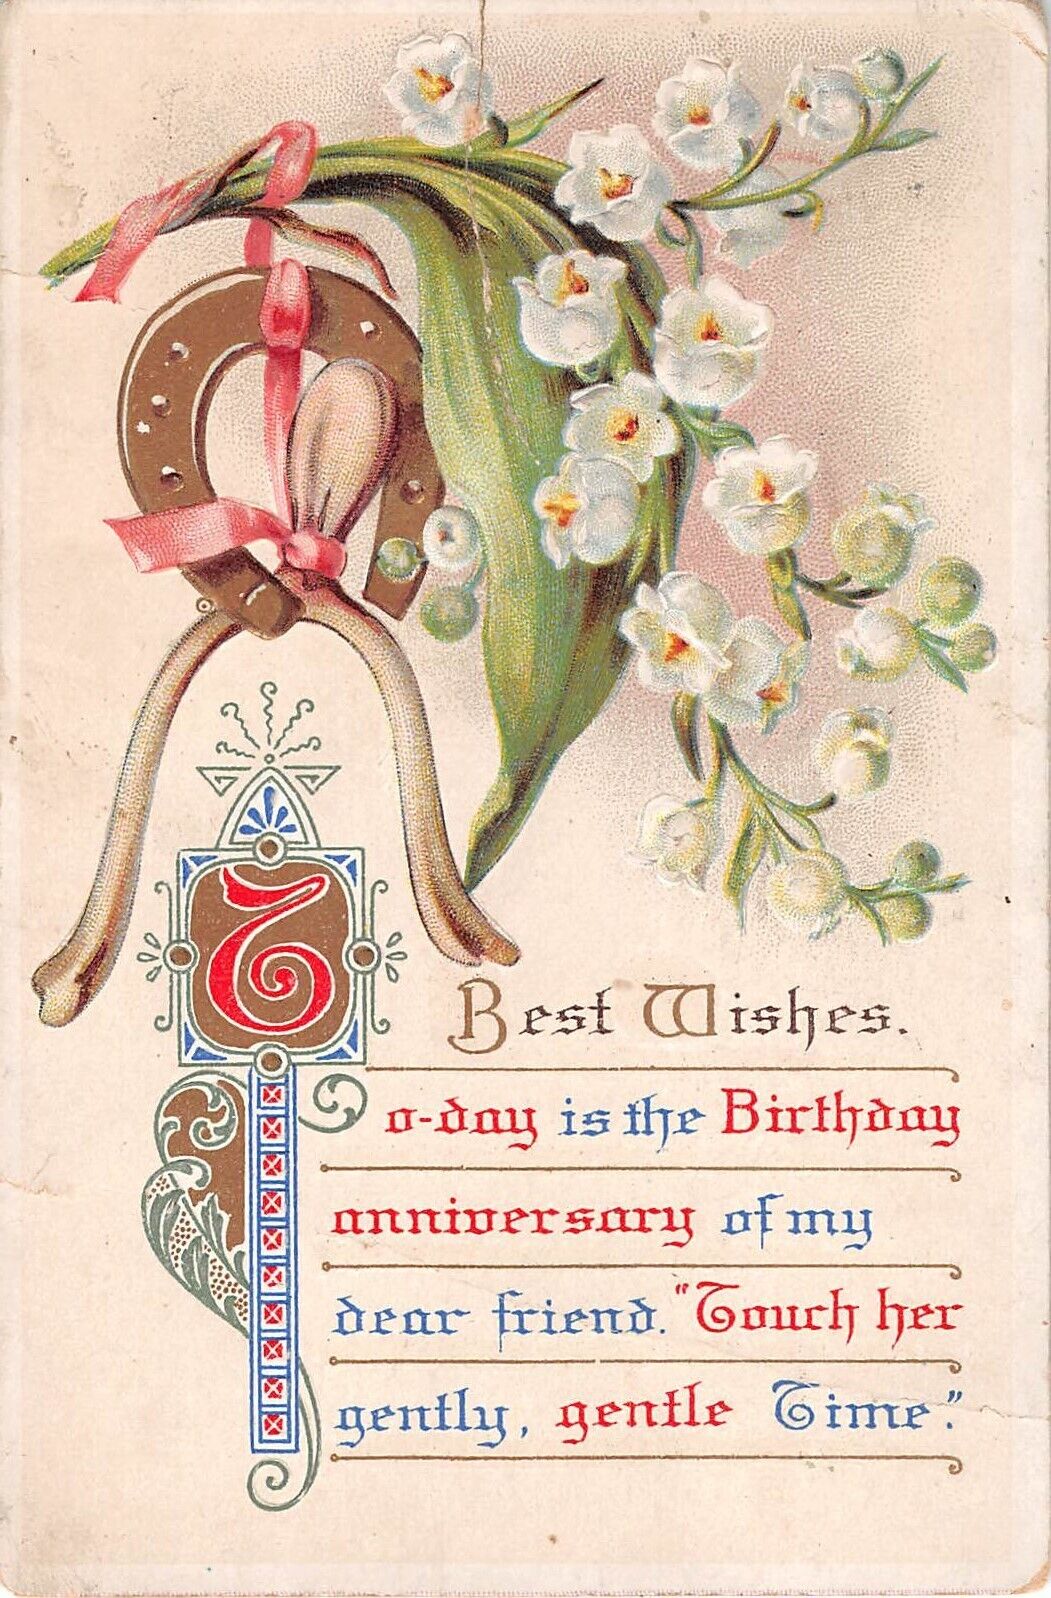 1922 Birthday Postcard of a Horseshoe, Wishbone, & Lovely Lily of the Valley